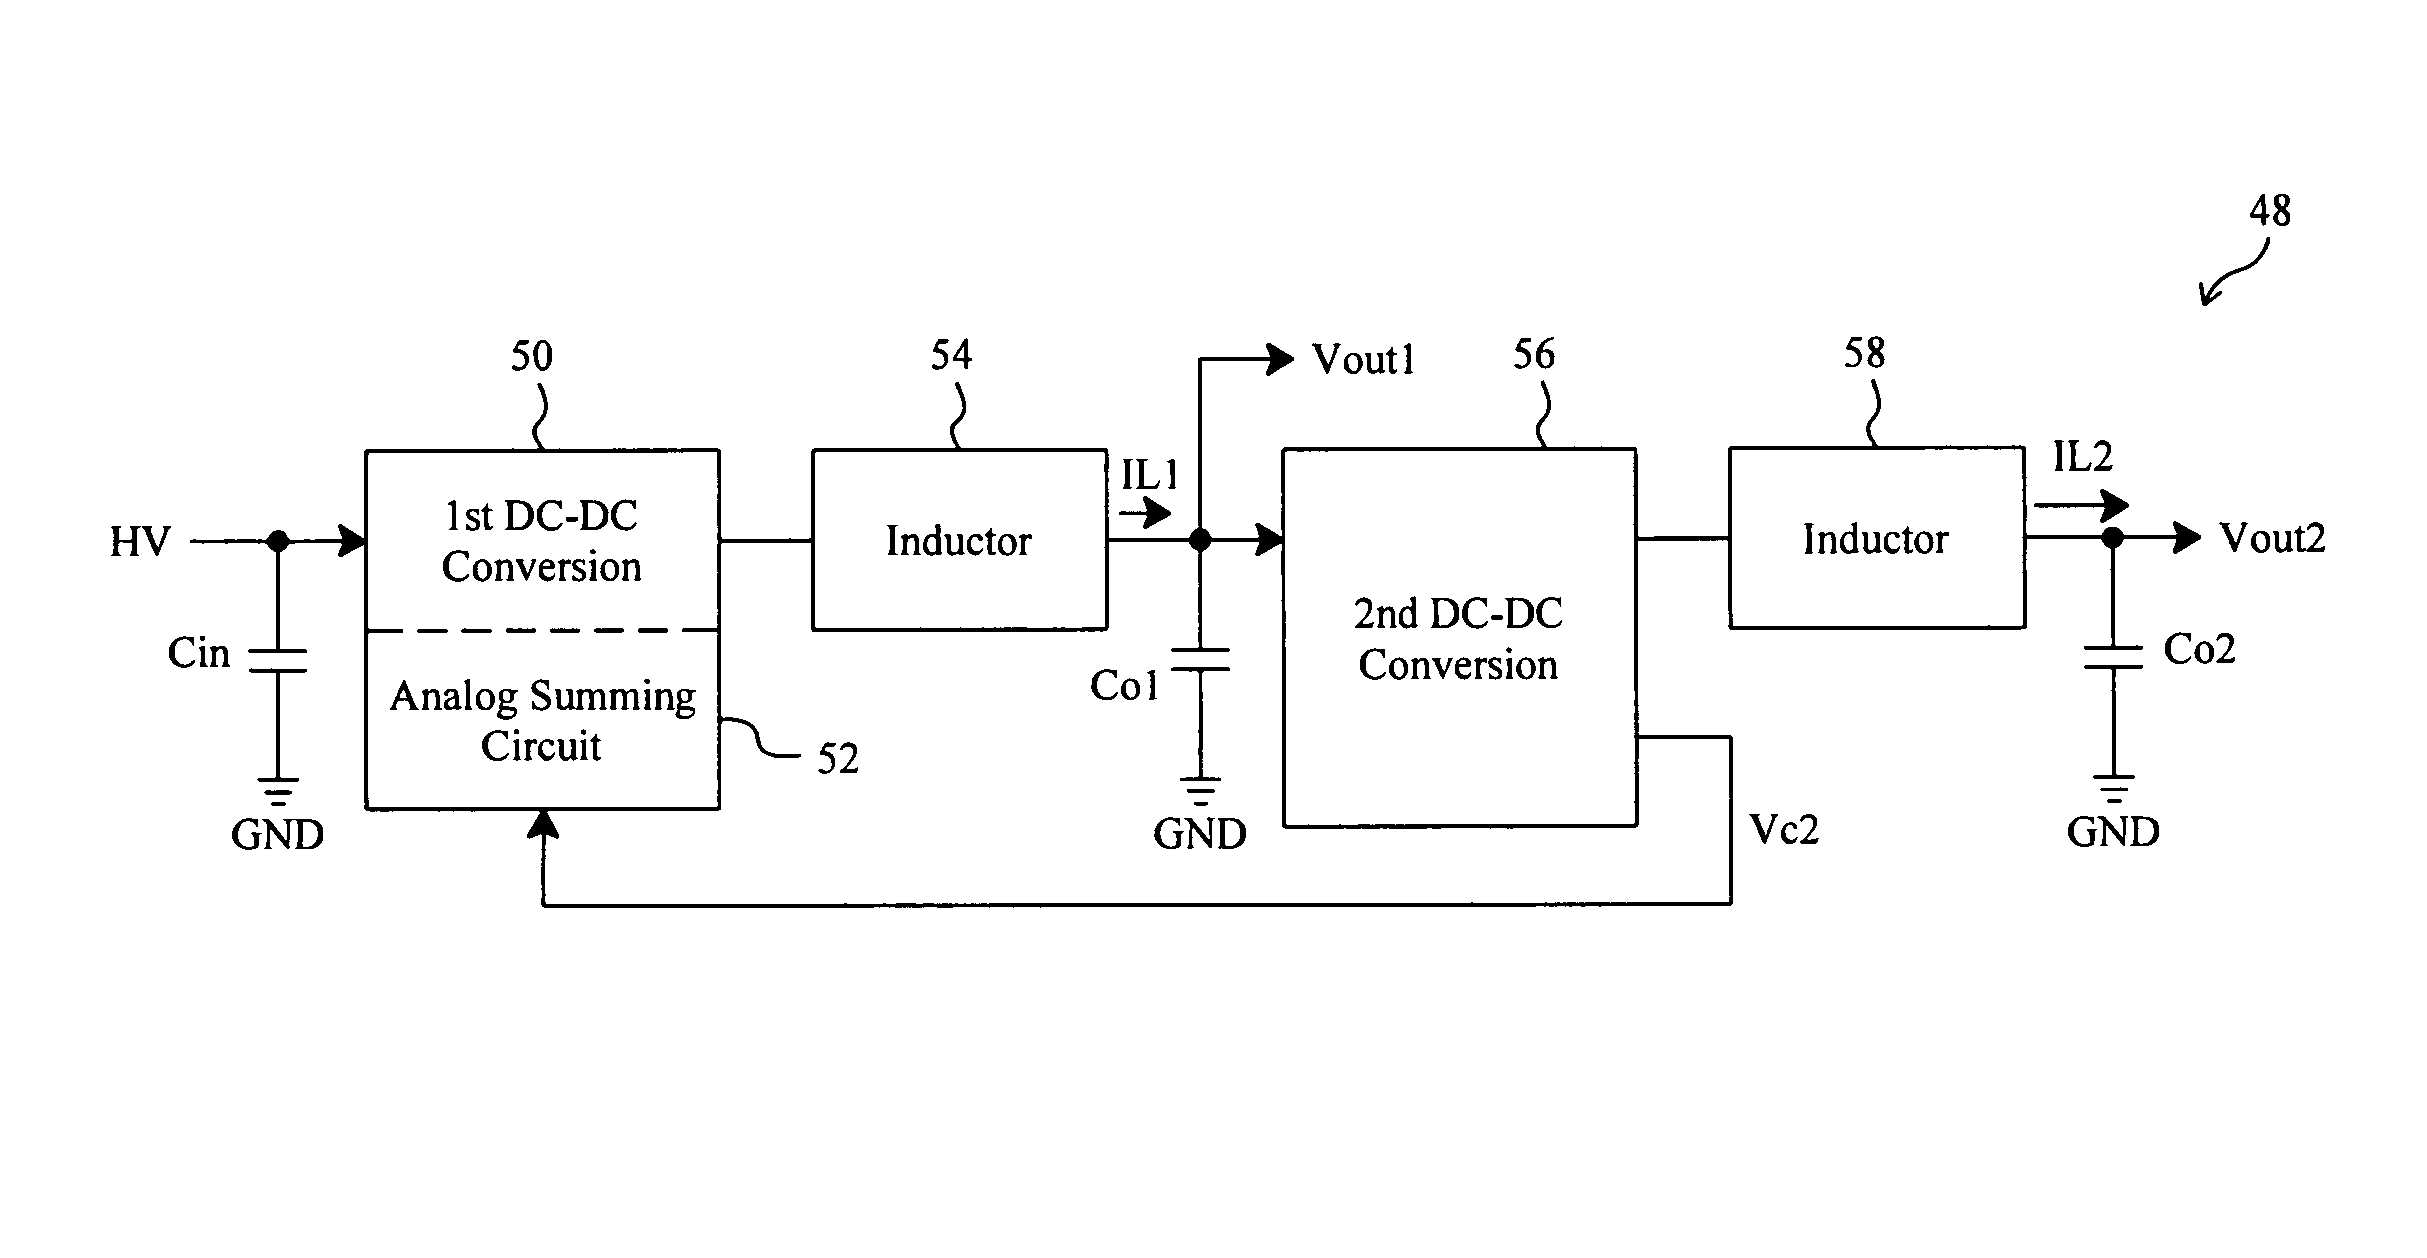 Cross-interference reduction of a buck power converter